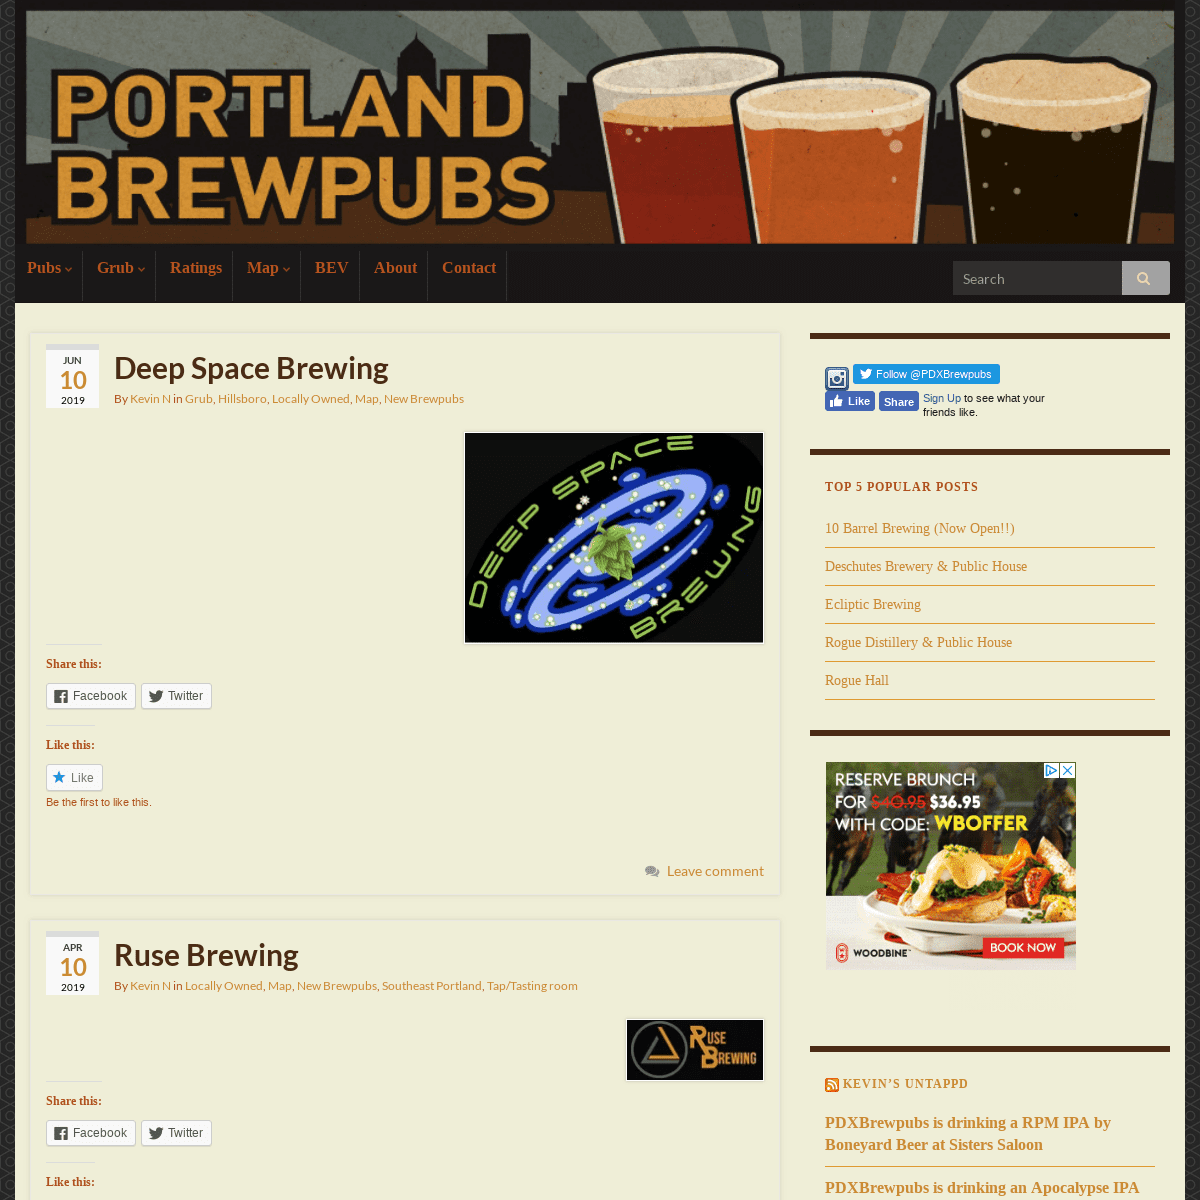 PortlandBrewpubs.com – The definitive list of the brewpubs, microbreweries, and brewery tasting rooms around the Greater Portlan